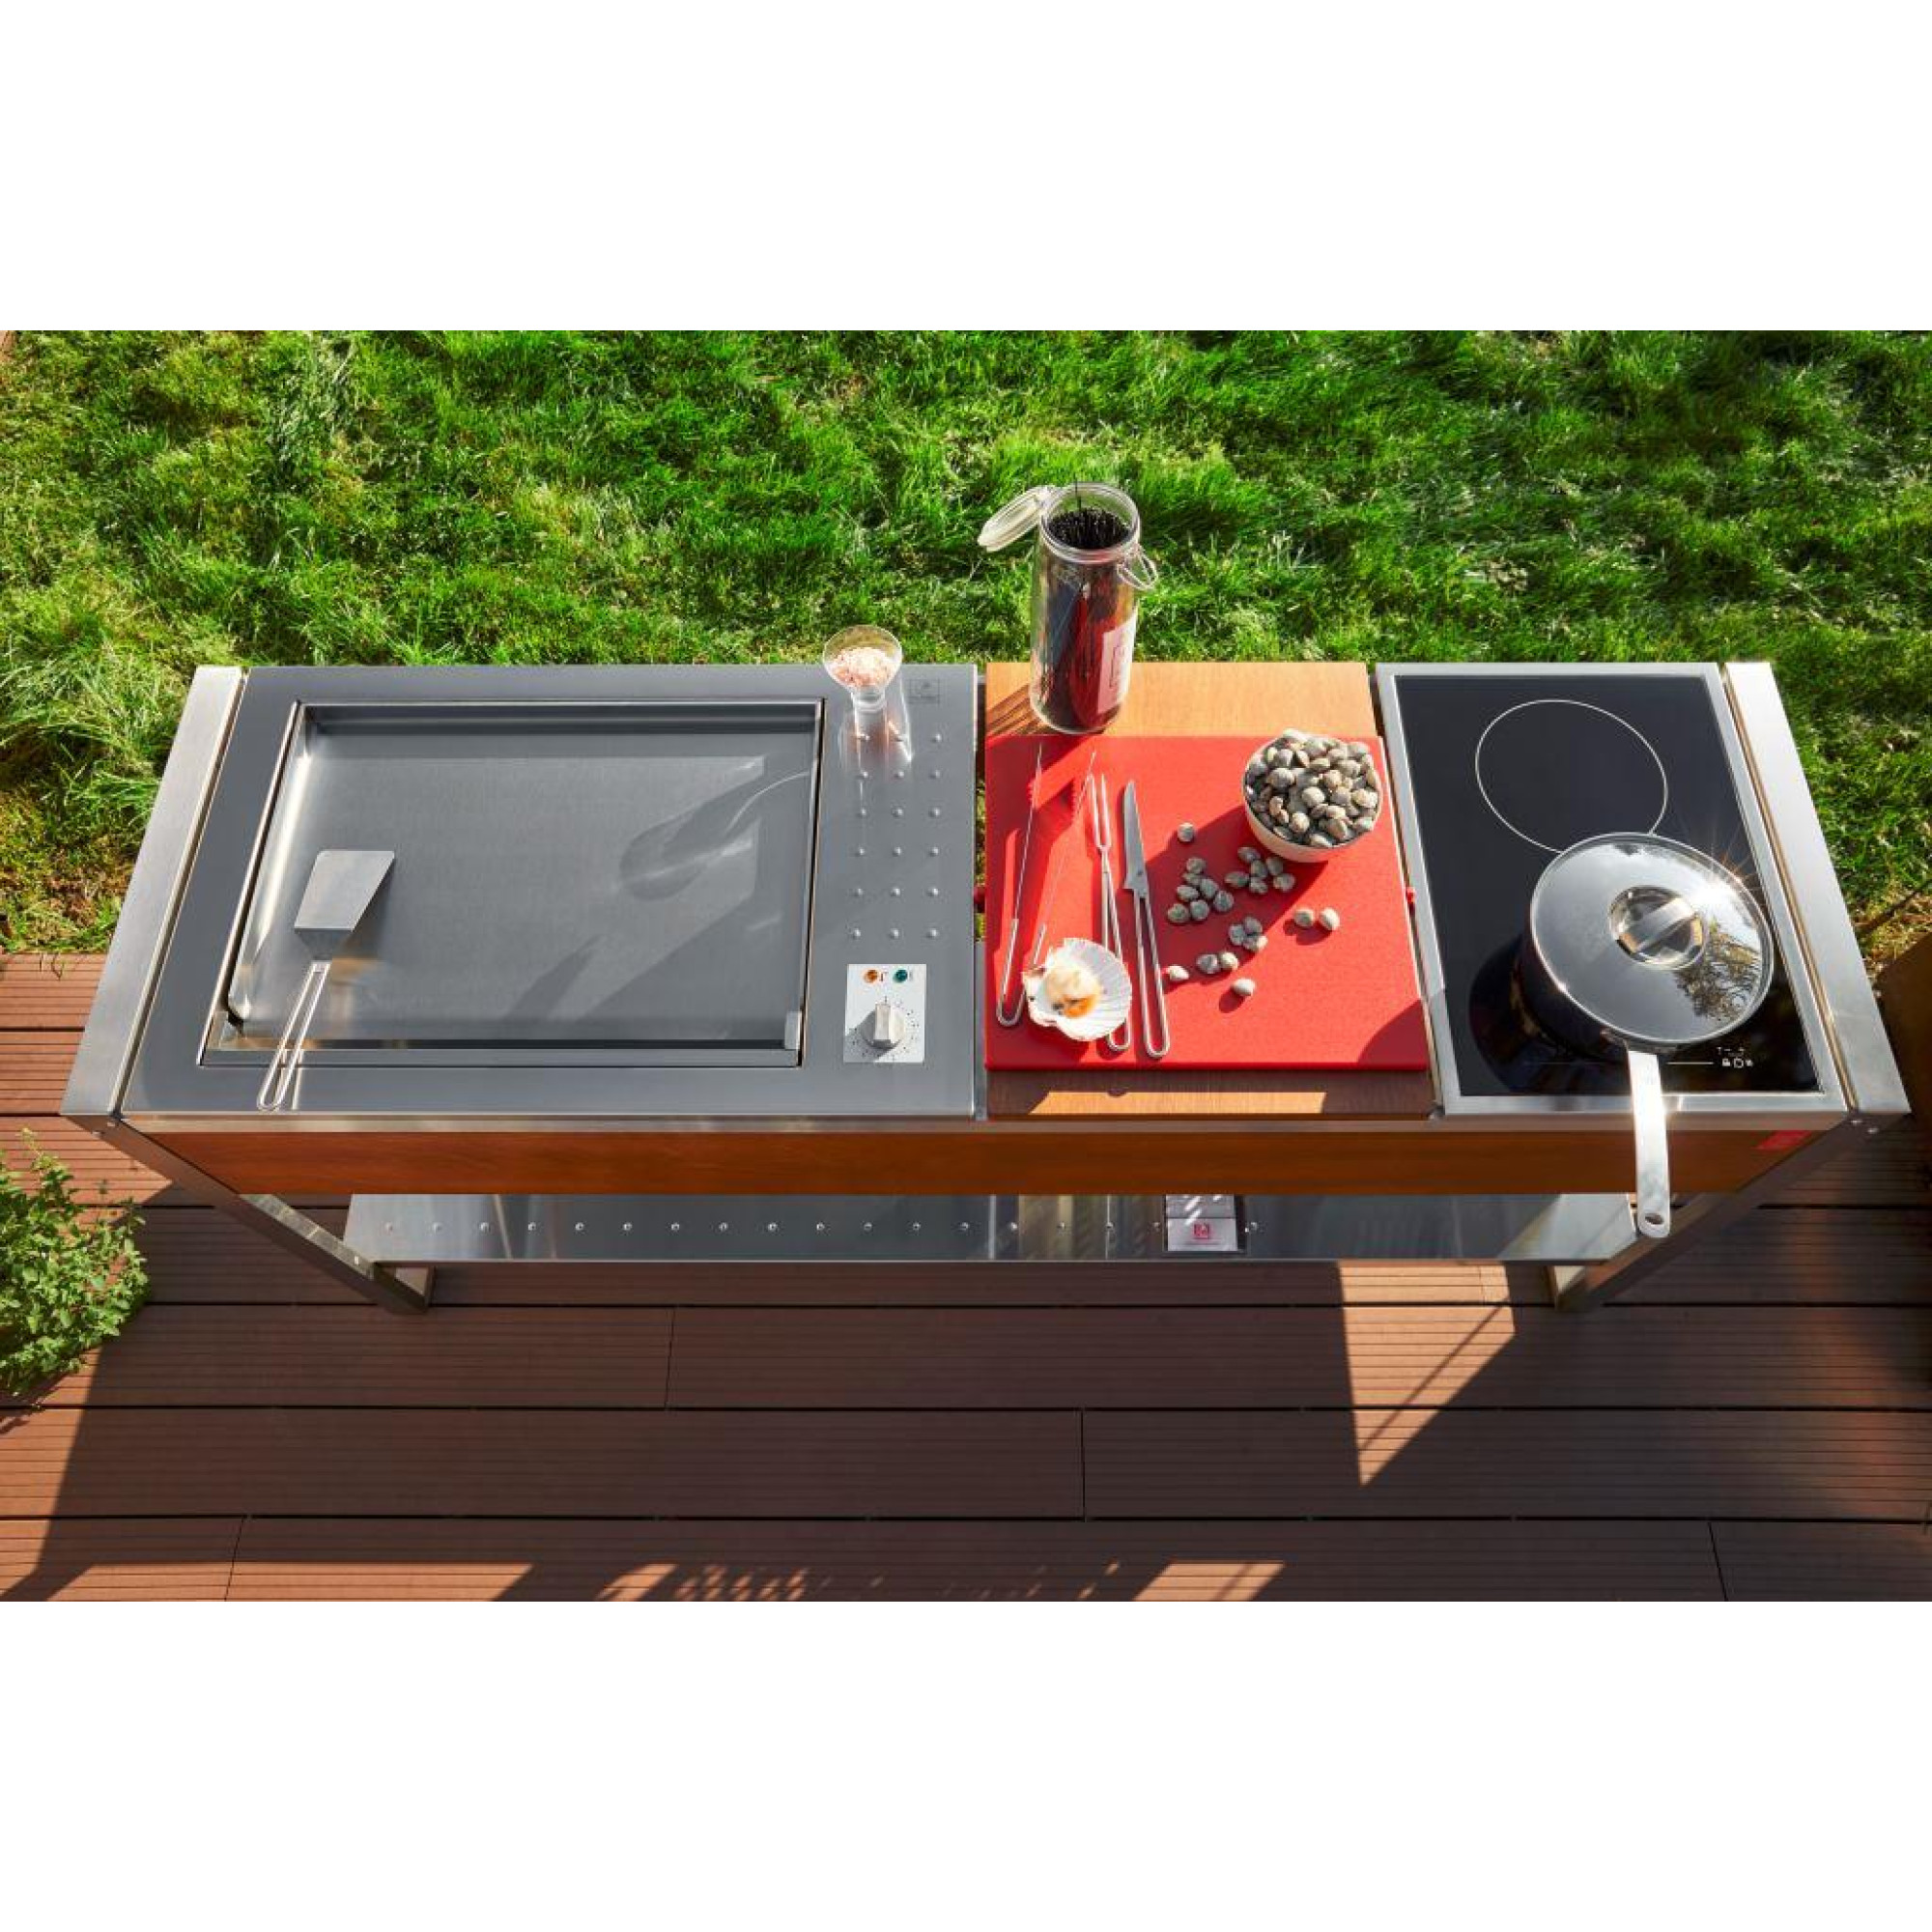 OASI 183, Outdoor Kitchens, Cooking system